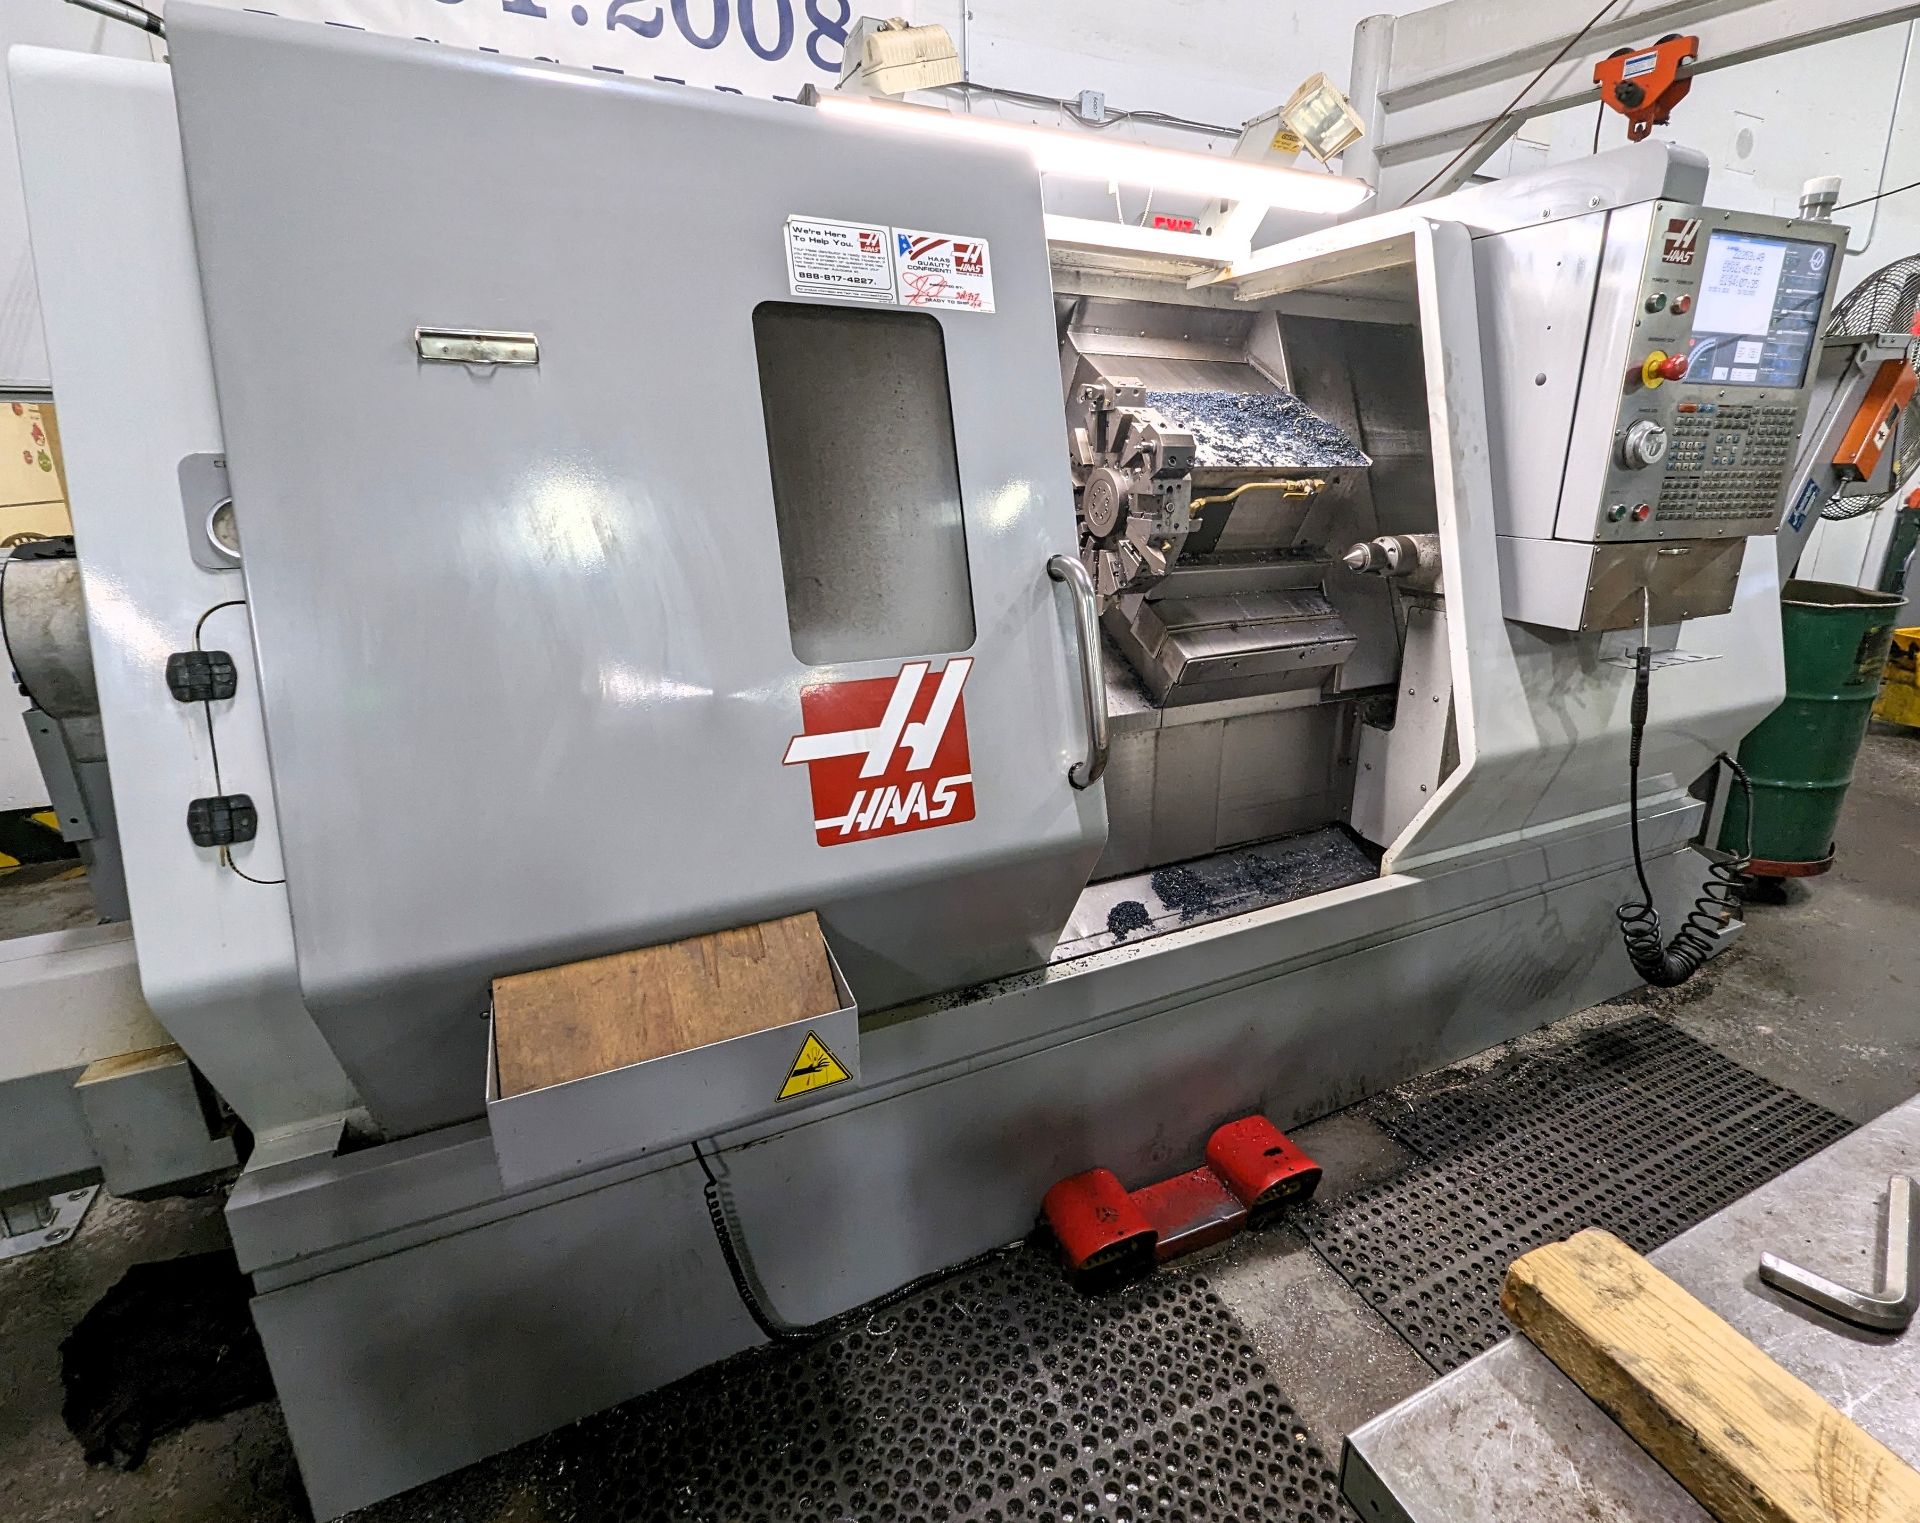 2008 HAAS SL-30TB CNC TURNING CENTER, CNC CONTROL, 15” CHUCK, BIG BORE, TAILSTOCK, TOOL SETTER, CHIP - Image 4 of 13